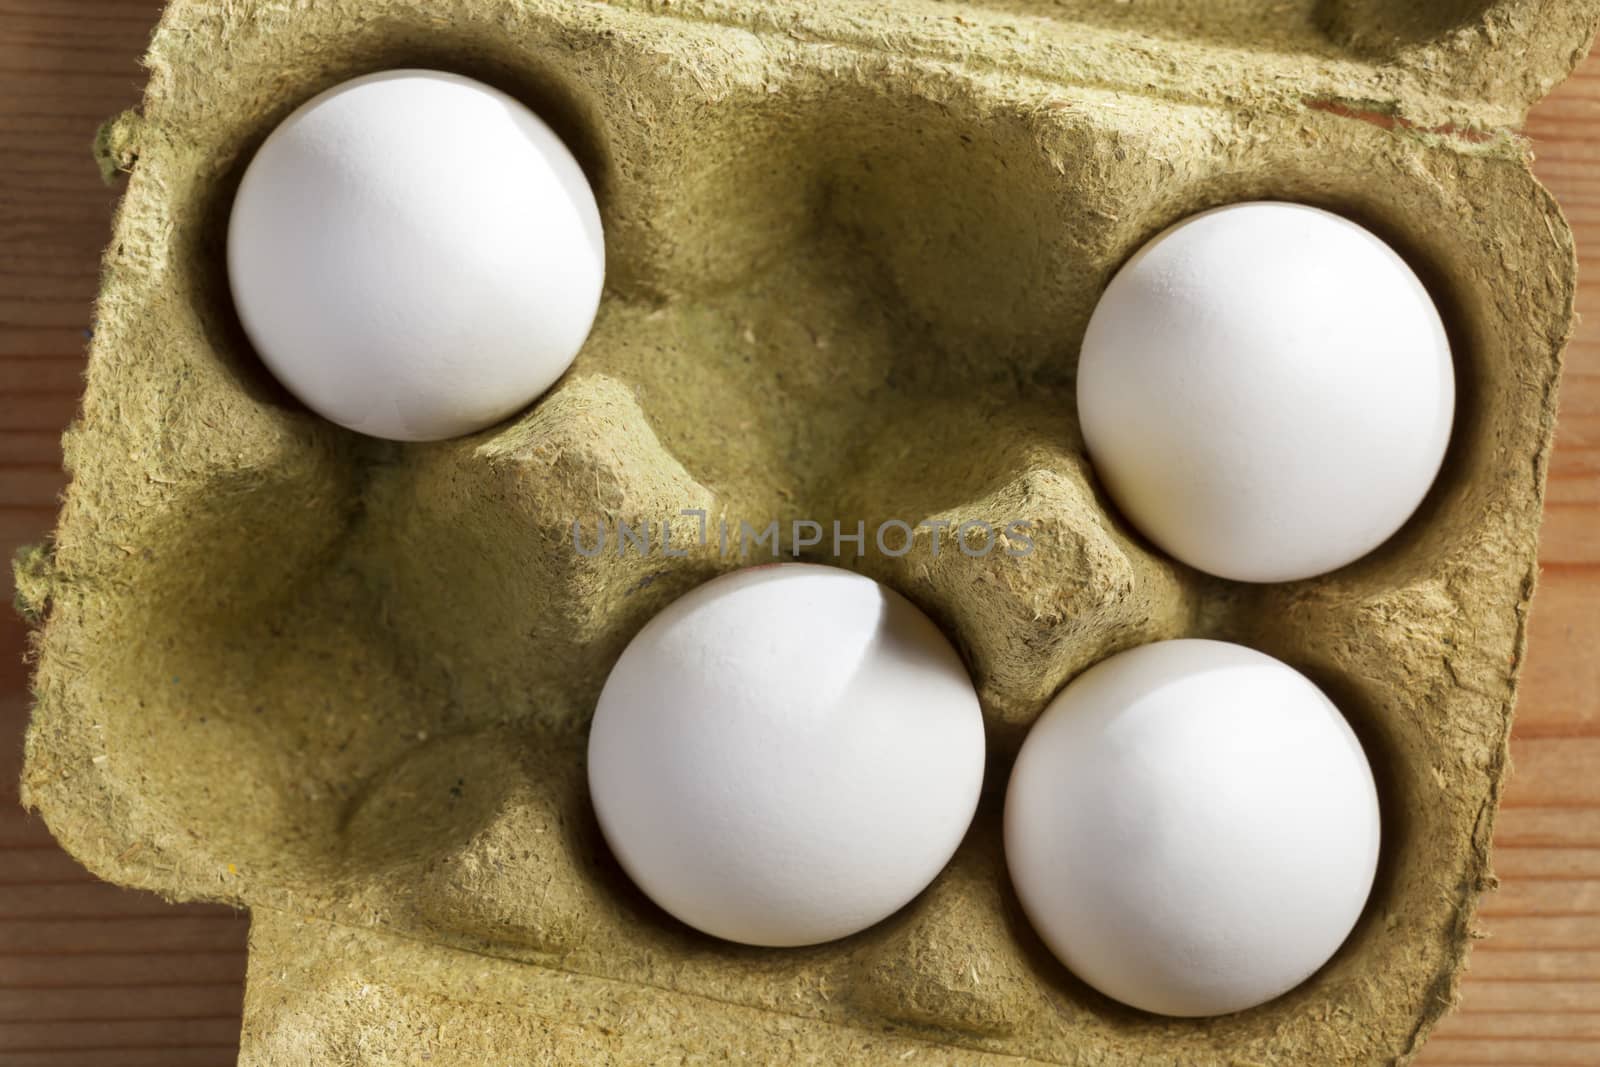 Four white organic eggs in a box consisting 50 percent grass fibers and is fully recyclable.